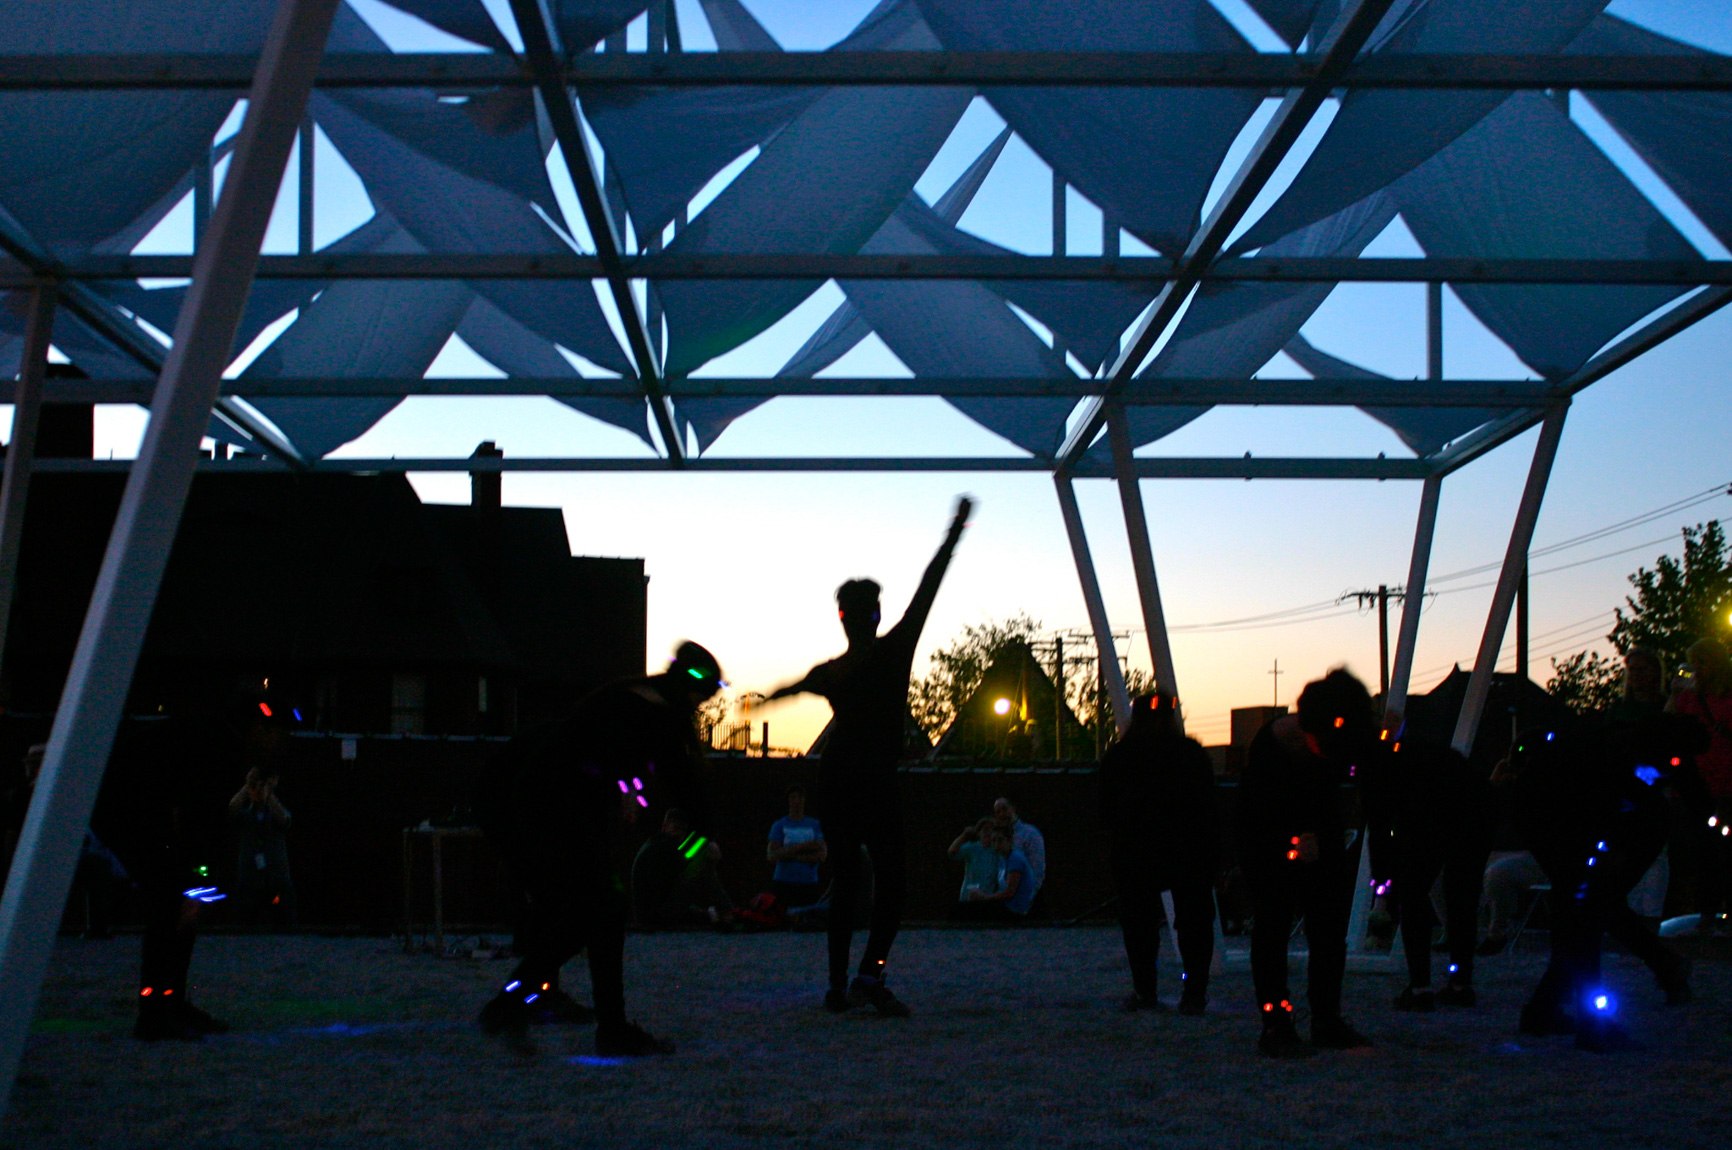 Community members dance in the dark under the Lots installation and colorful designs flash over them.